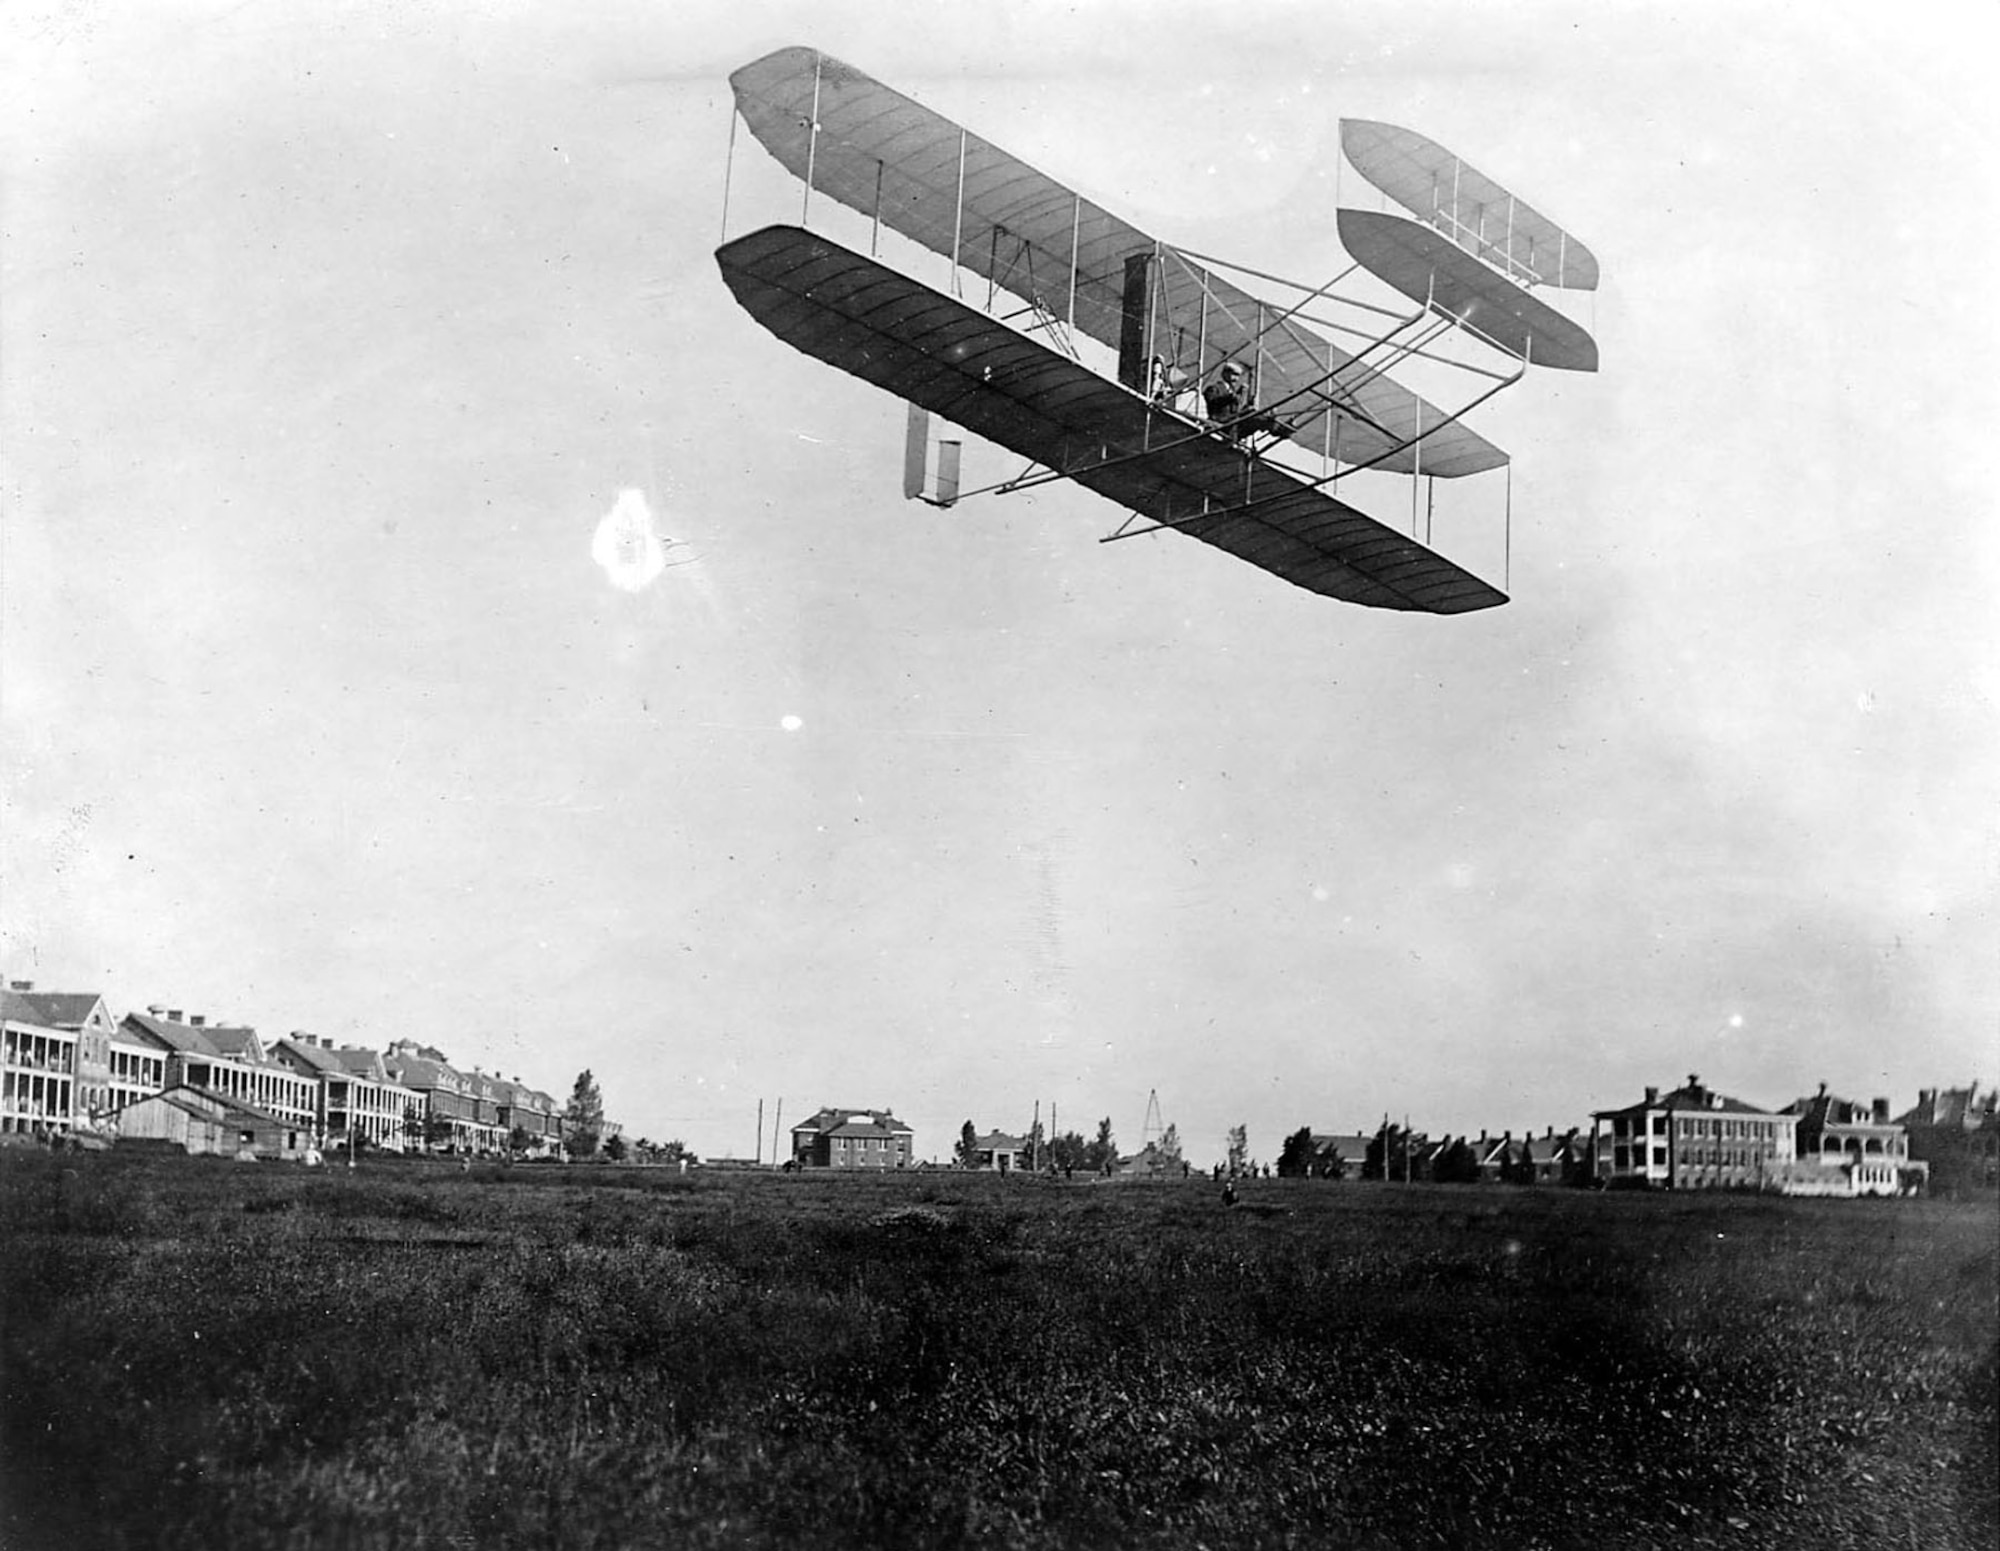 Orville Wright took the 1908 Flyer to Fort Myer, Va., in August 1908, and made flights almost daily. (U.S. Air Force photo)